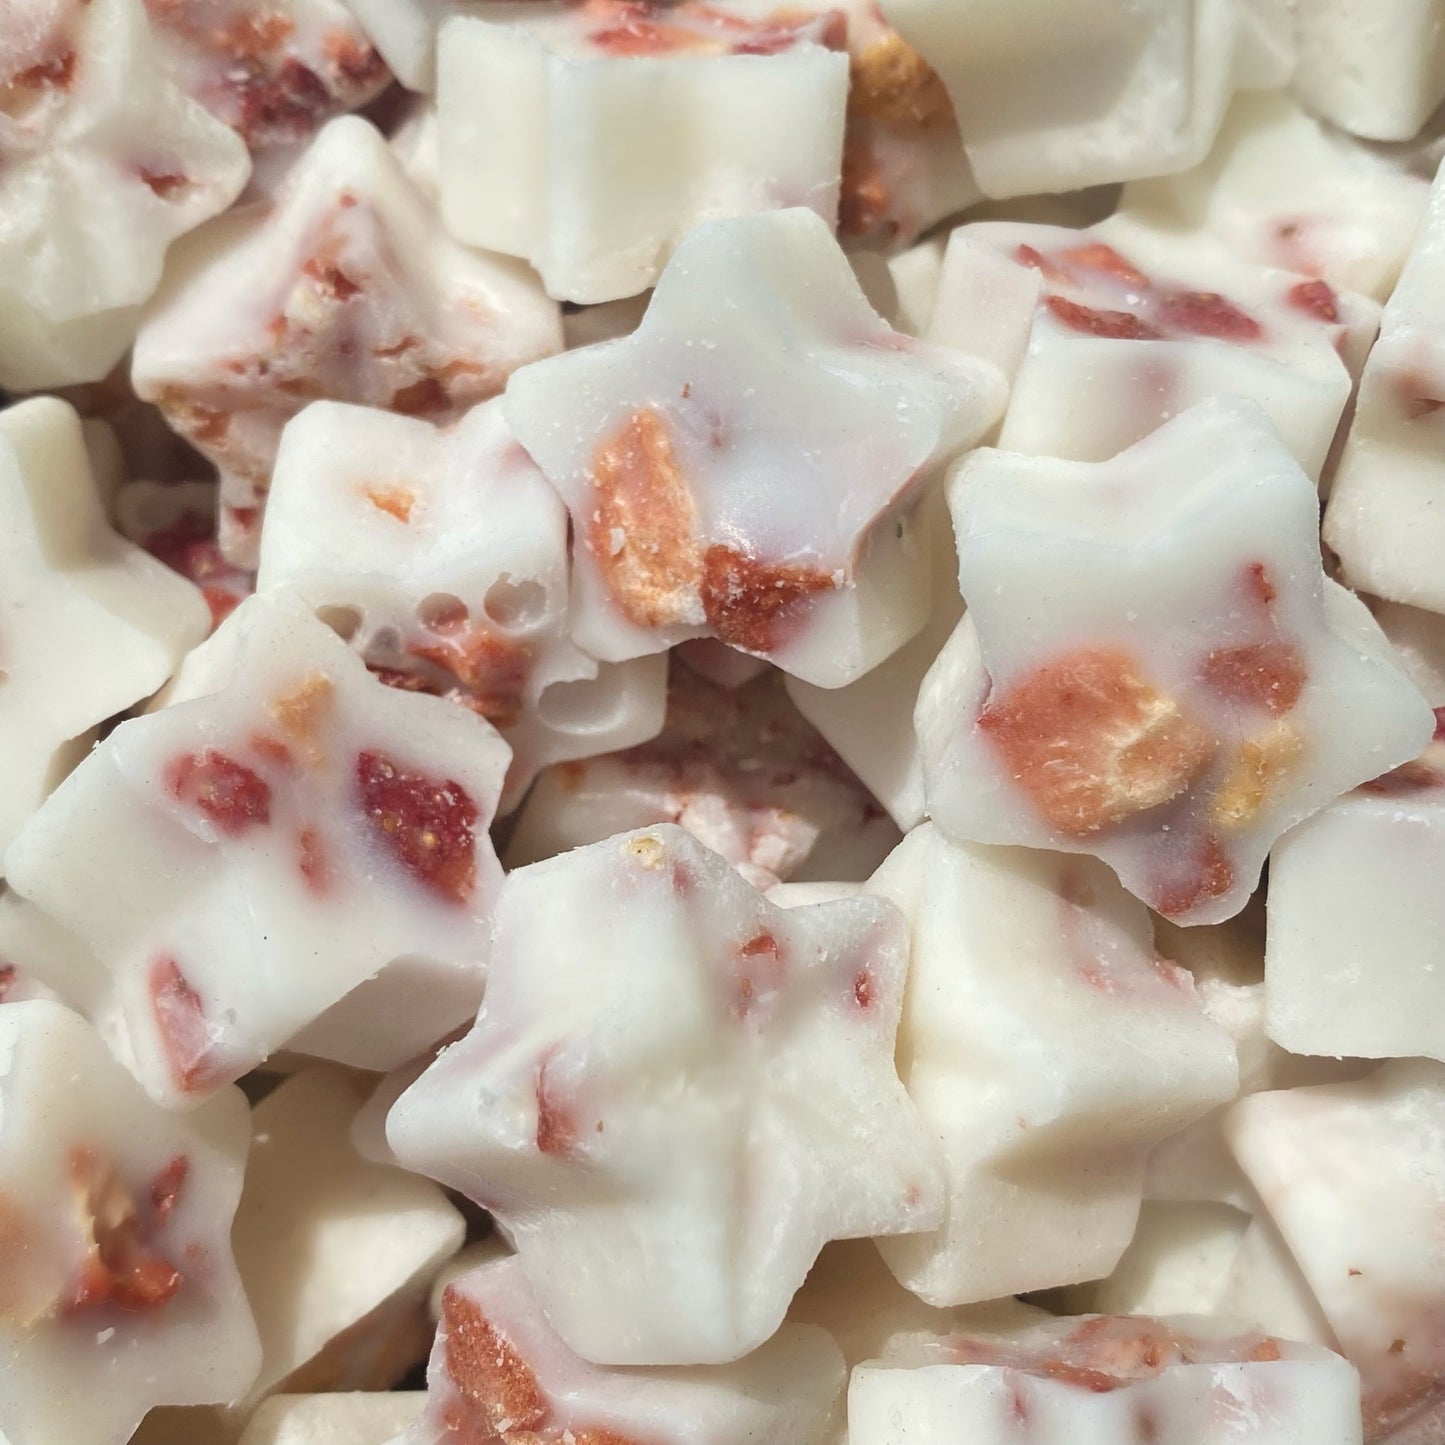 Freckleface Strawberries and Cream Soya Wax Melts - Bumble Living